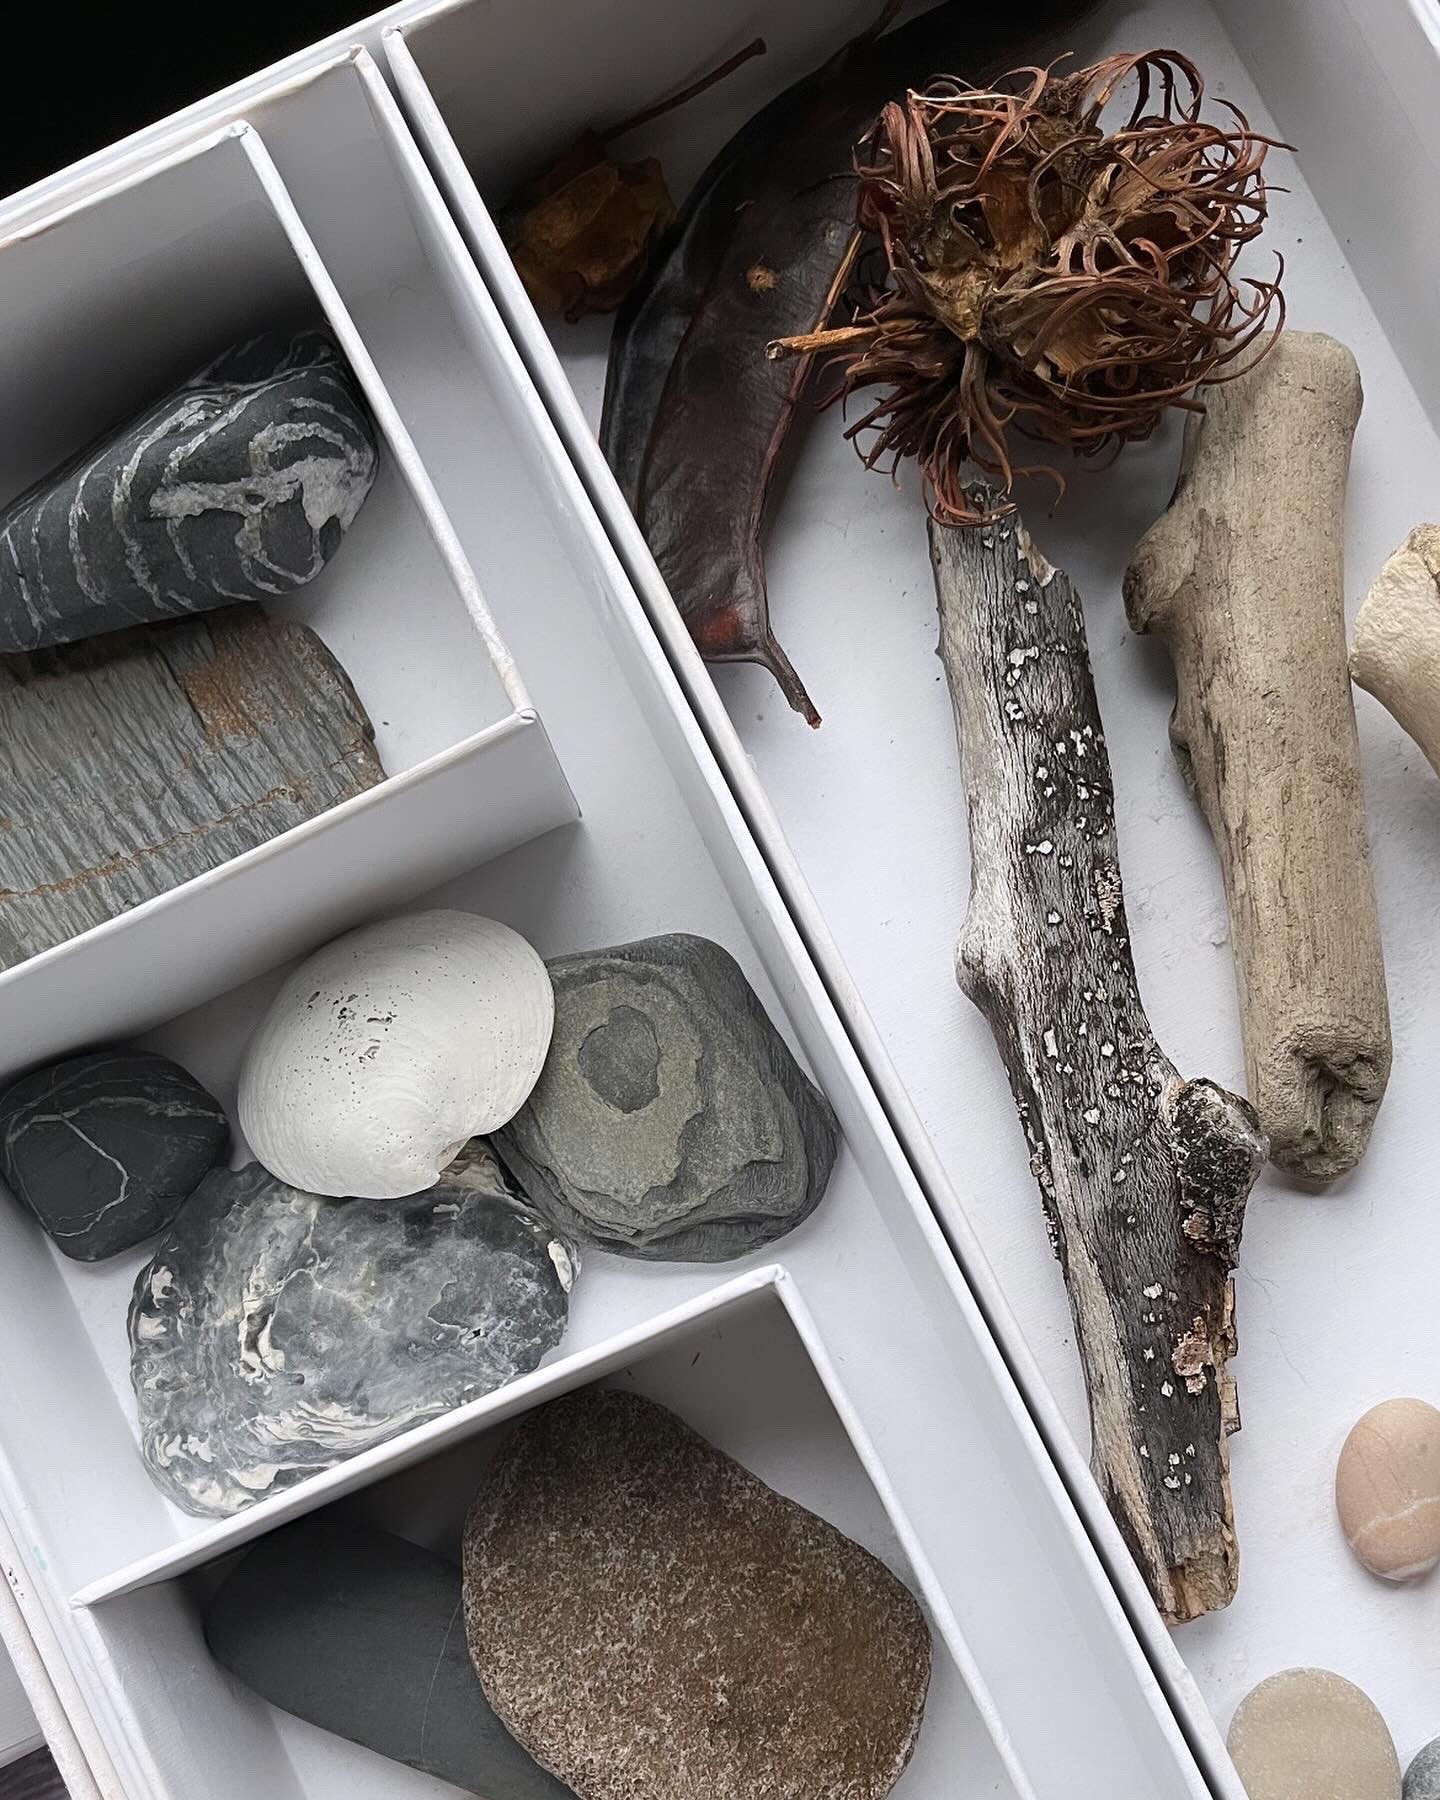 Shells, stones and natural objects as inspiration